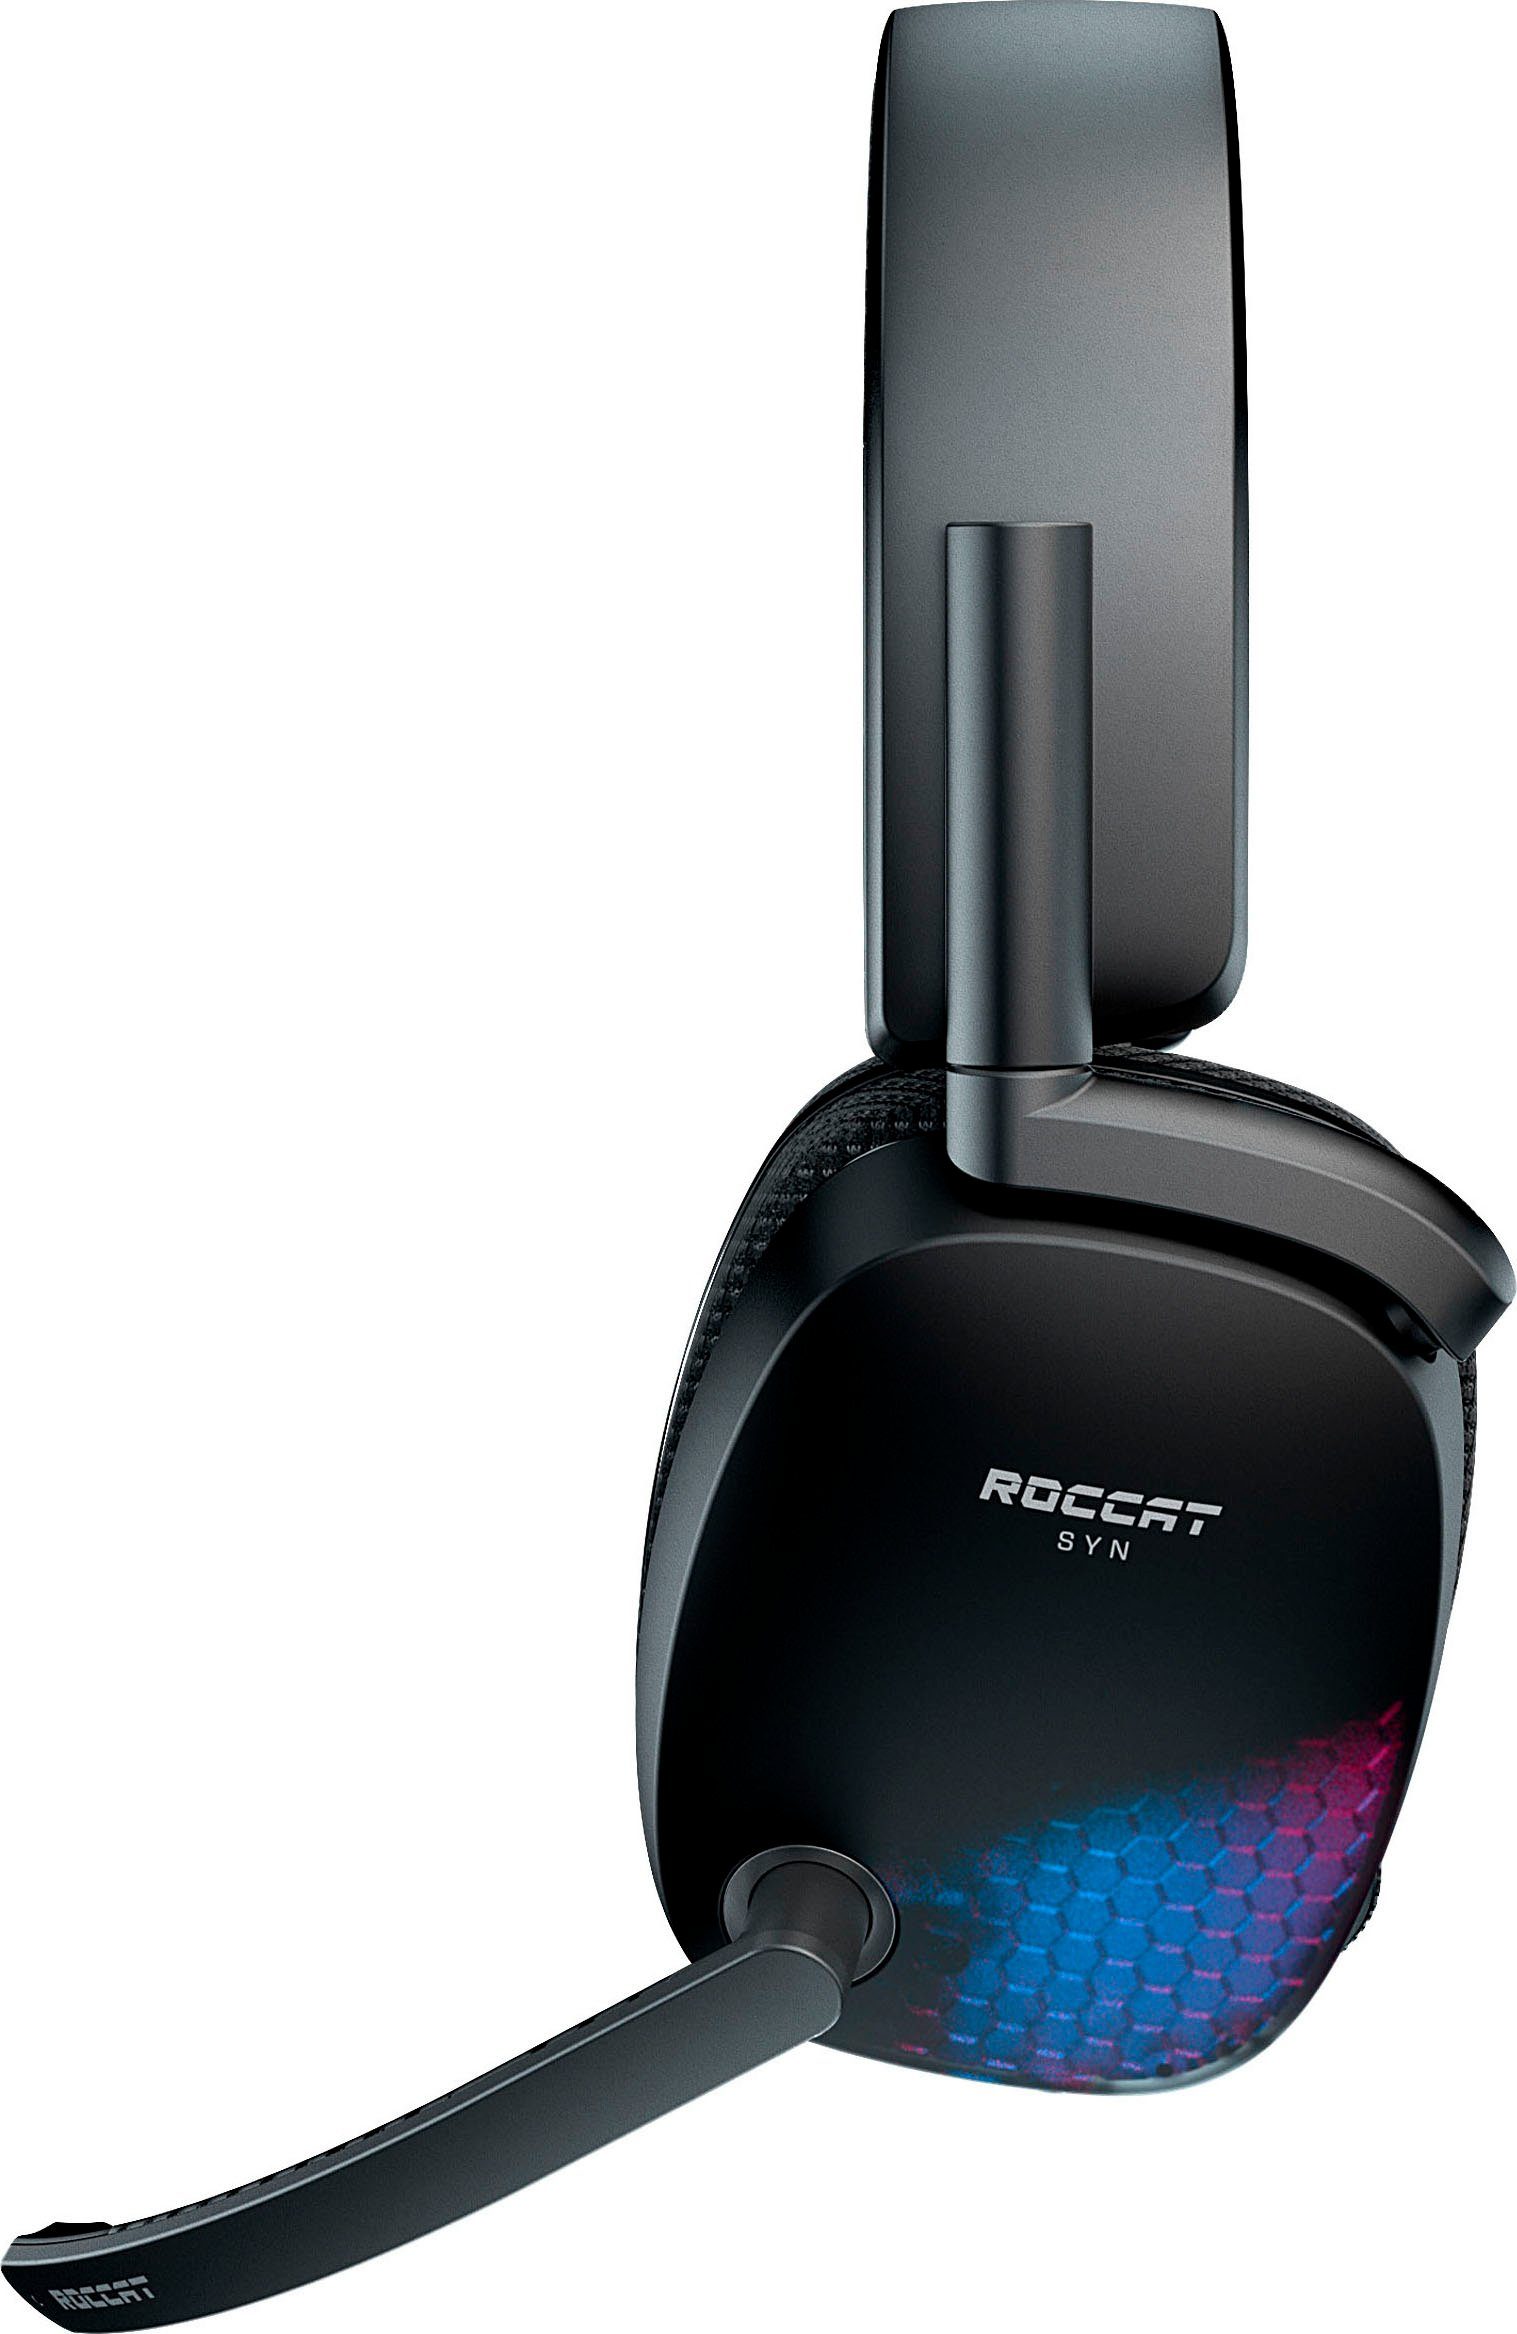 WLAN SYN ROCCAT Gaming-Headset (WiFi) Air (Noise-Cancelling, Pro